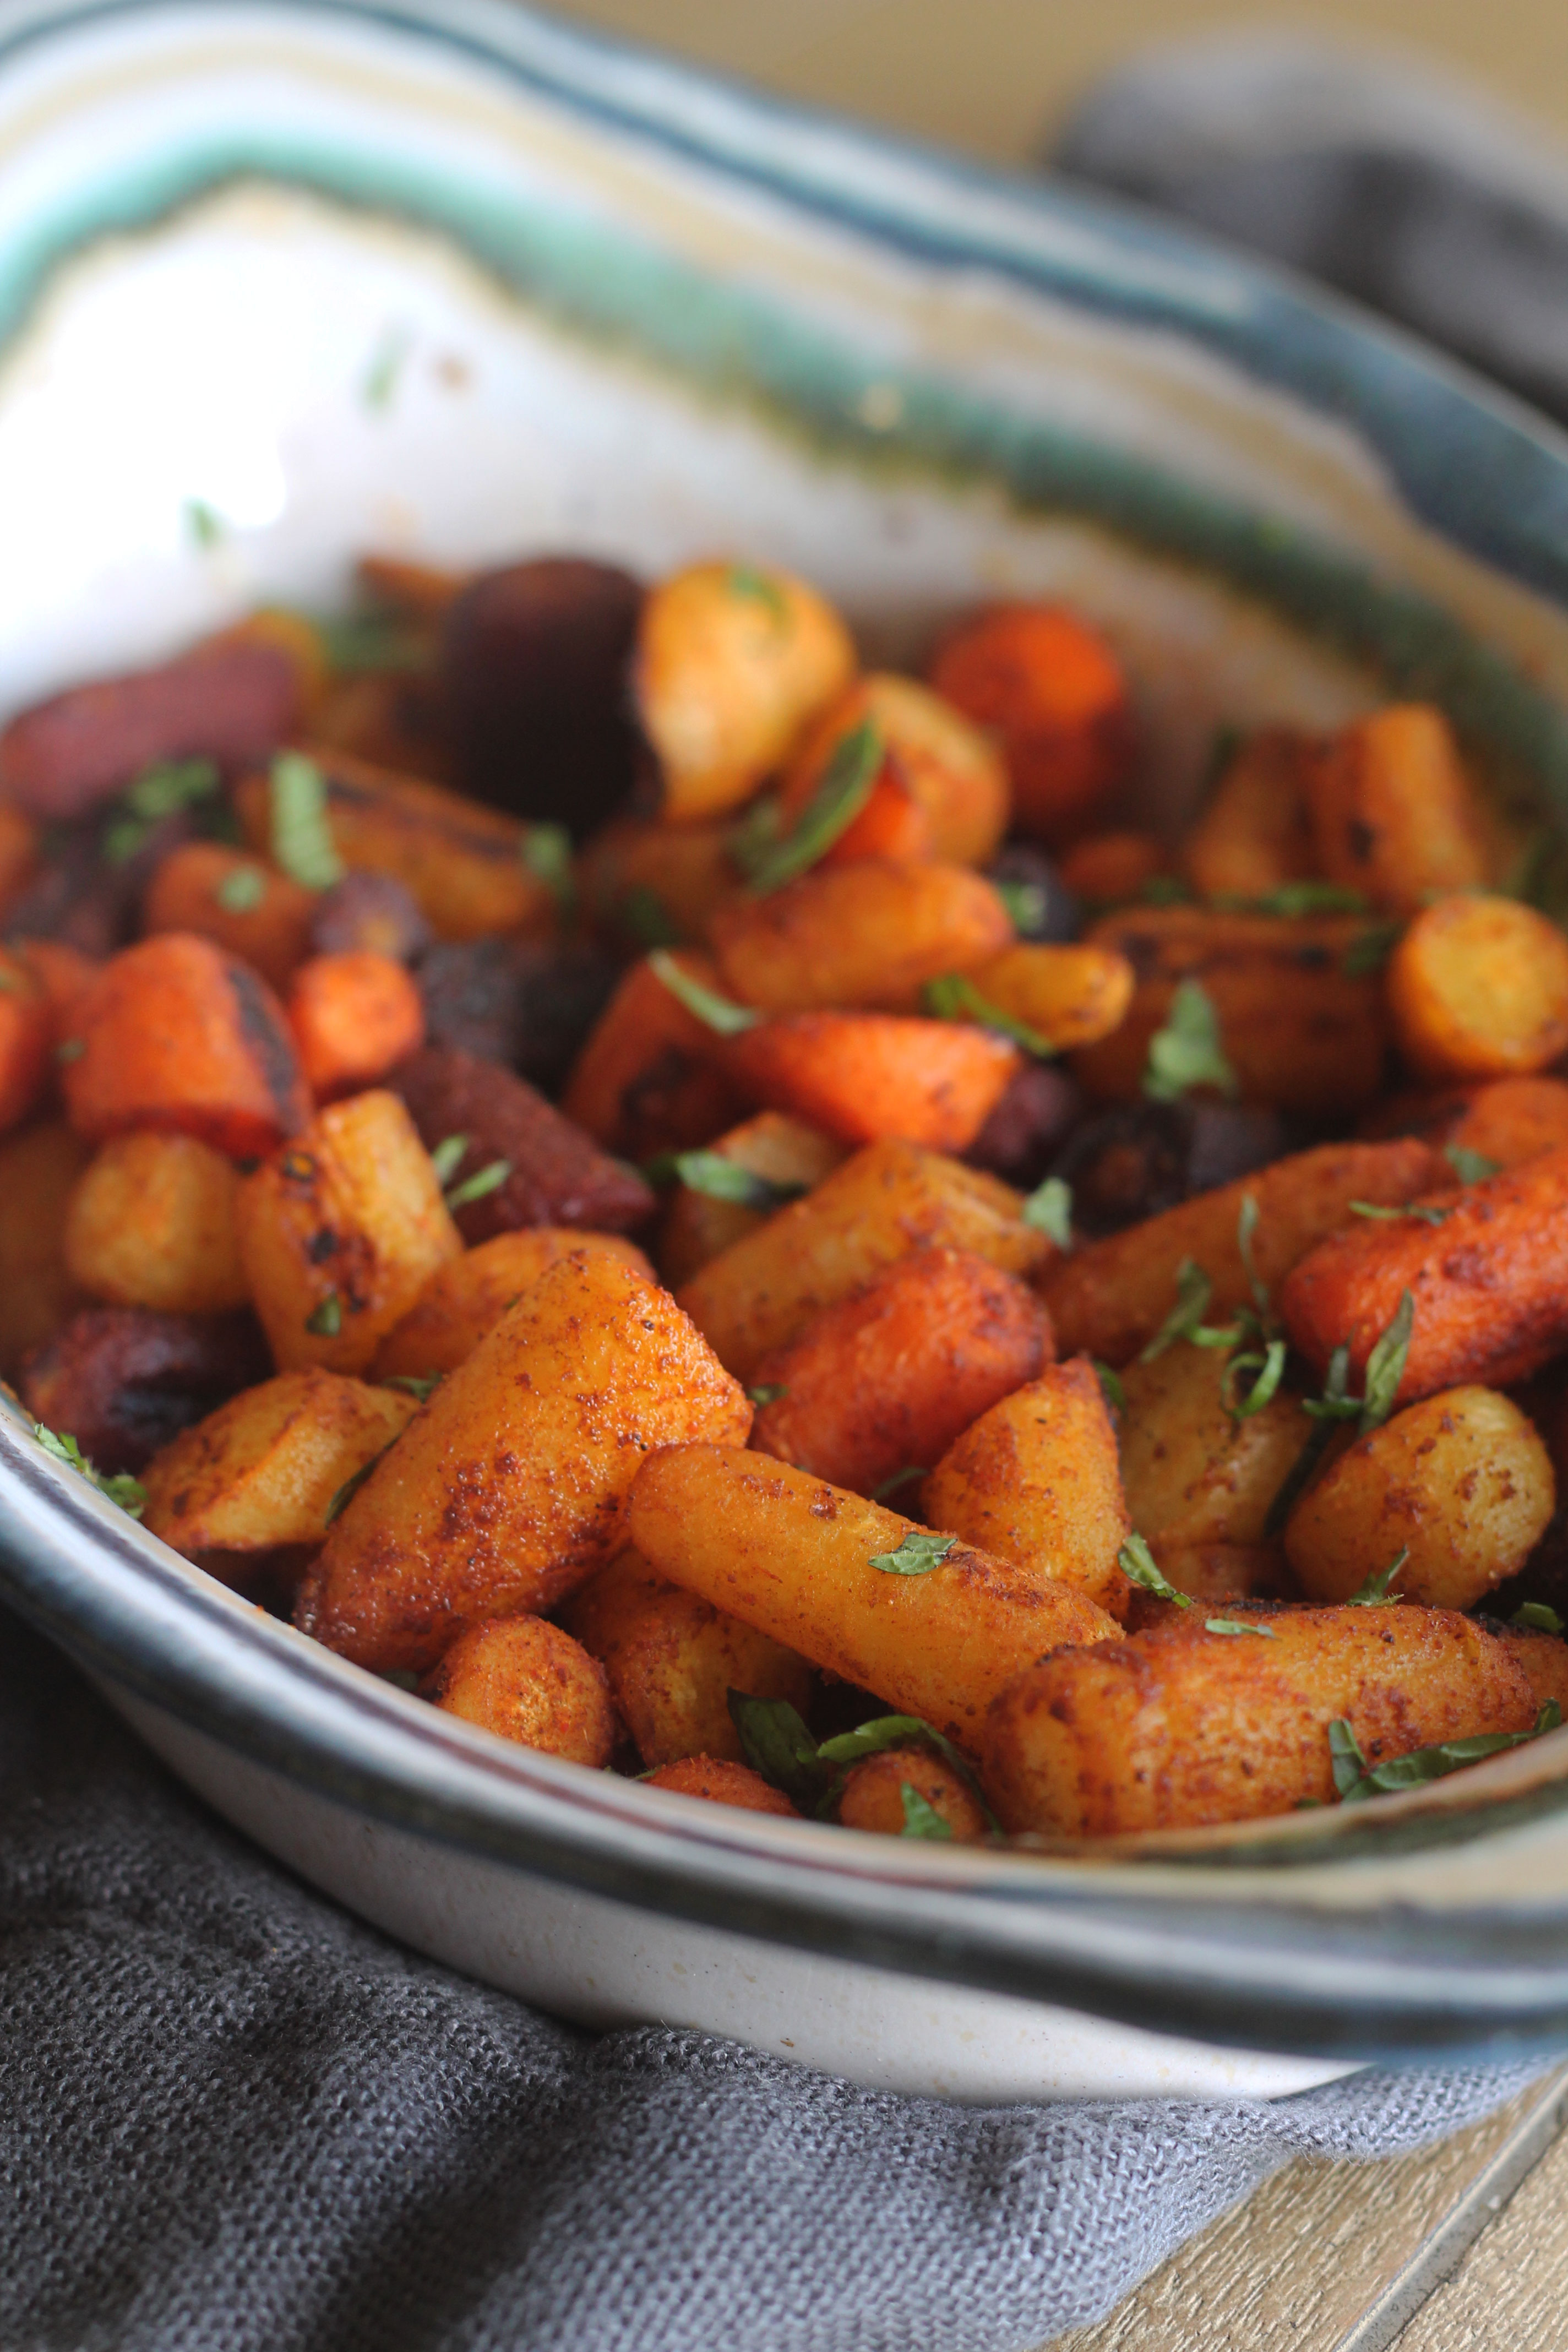 Not your average roasted carrot side dish these rainbow carrots are full of flavor